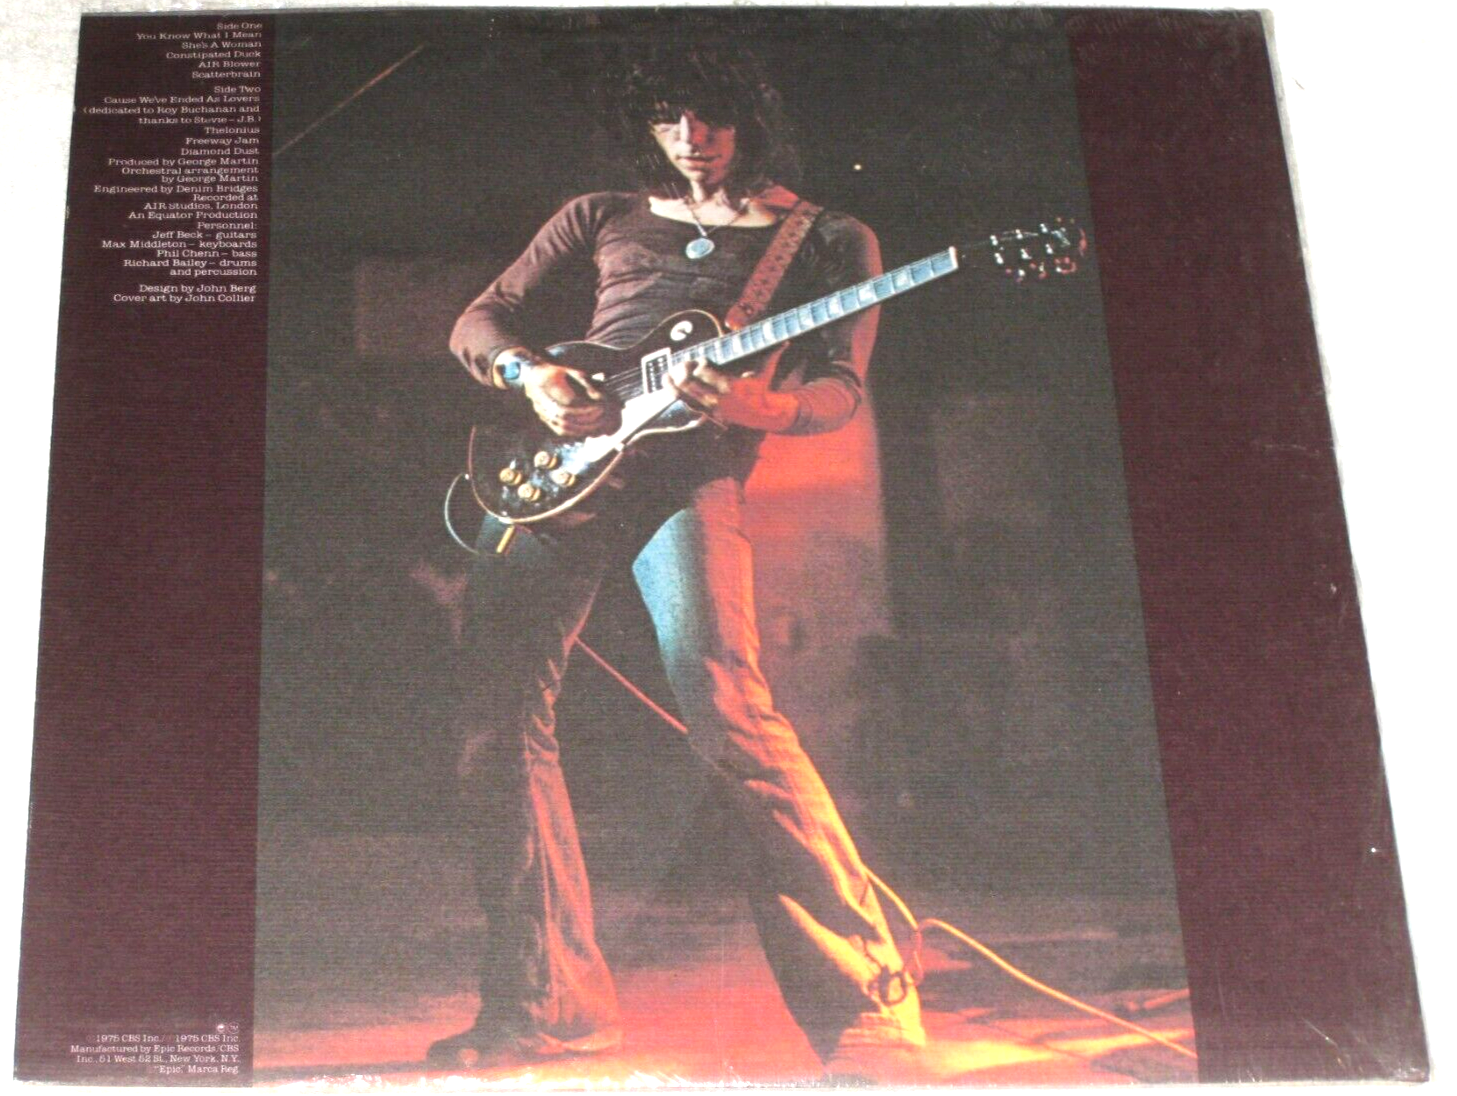 Pic 4 Jeff Beck Group- Blow By Blow- Wired- Jan Hammer-Original LP In Shrink -EX To NM